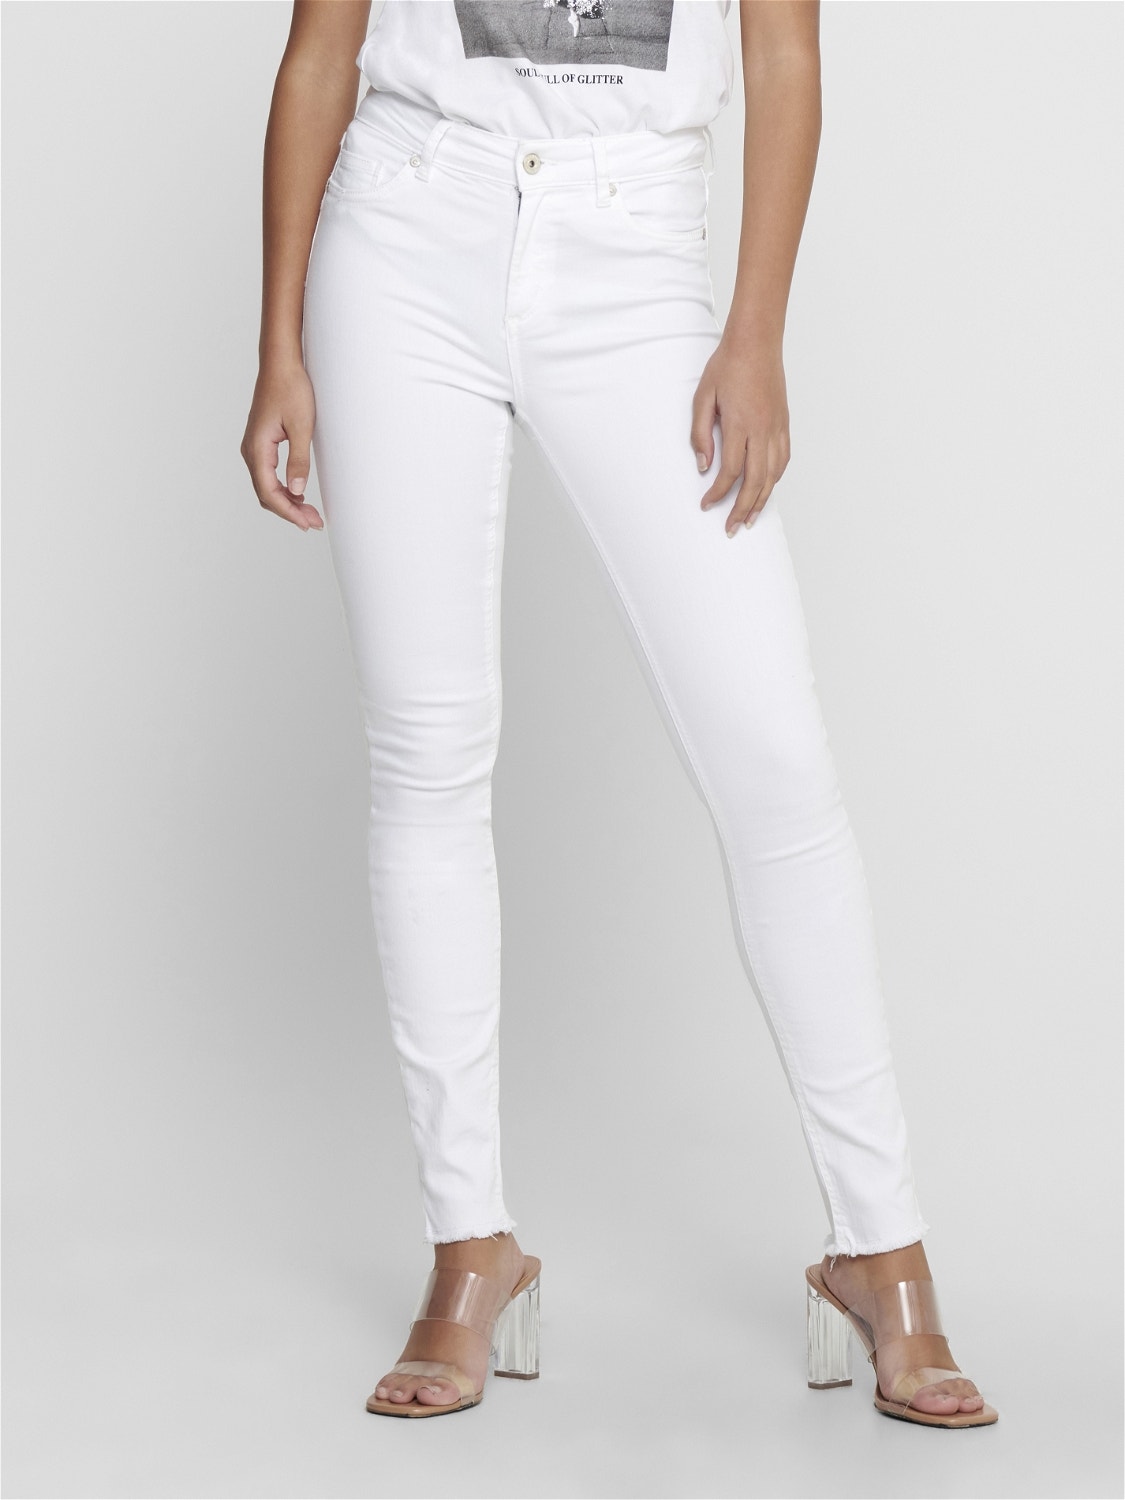 ONLY ONLRoyal highBlush mid ankle Jeans skinny fit -White - 15155438